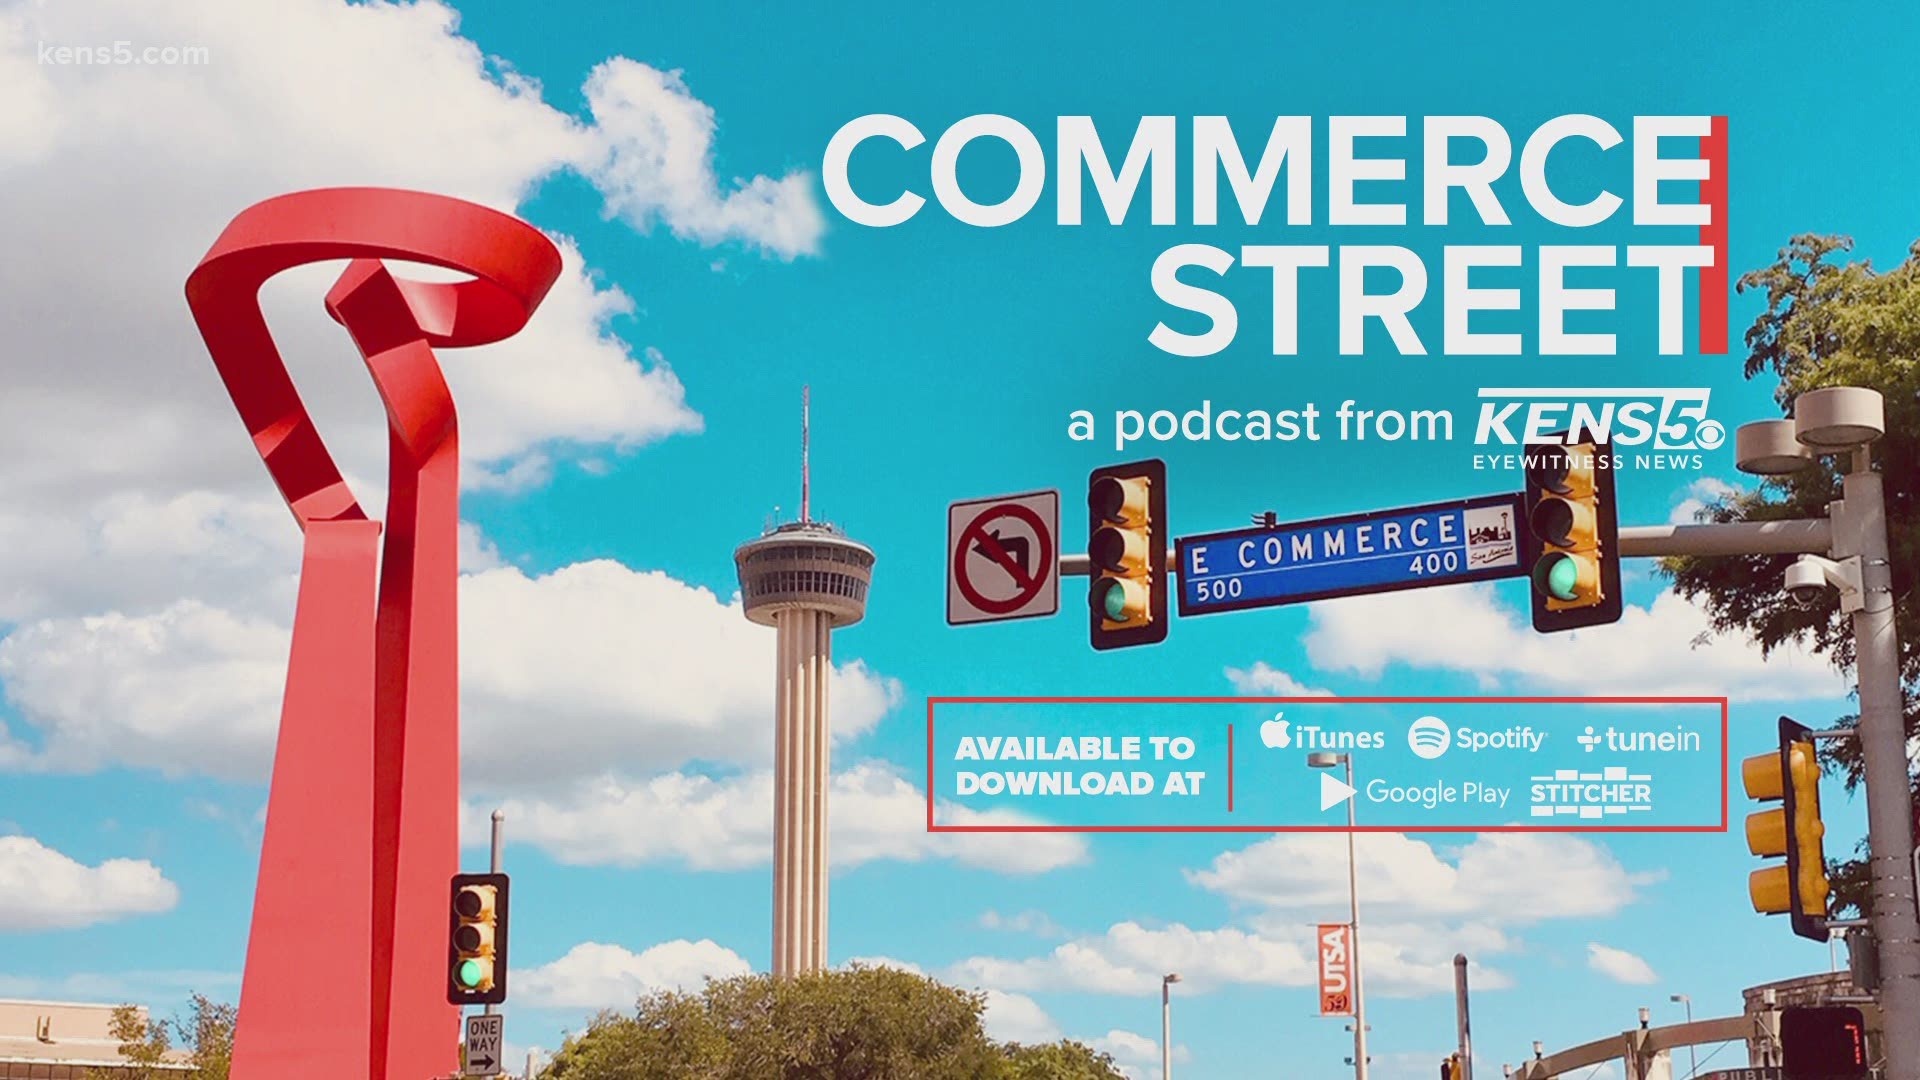 Centro San Antonio hopes sharing resources and sparking creativity will help small businesses weather a crisis. Full podcast: https://tinyurl.com/y493jxc9